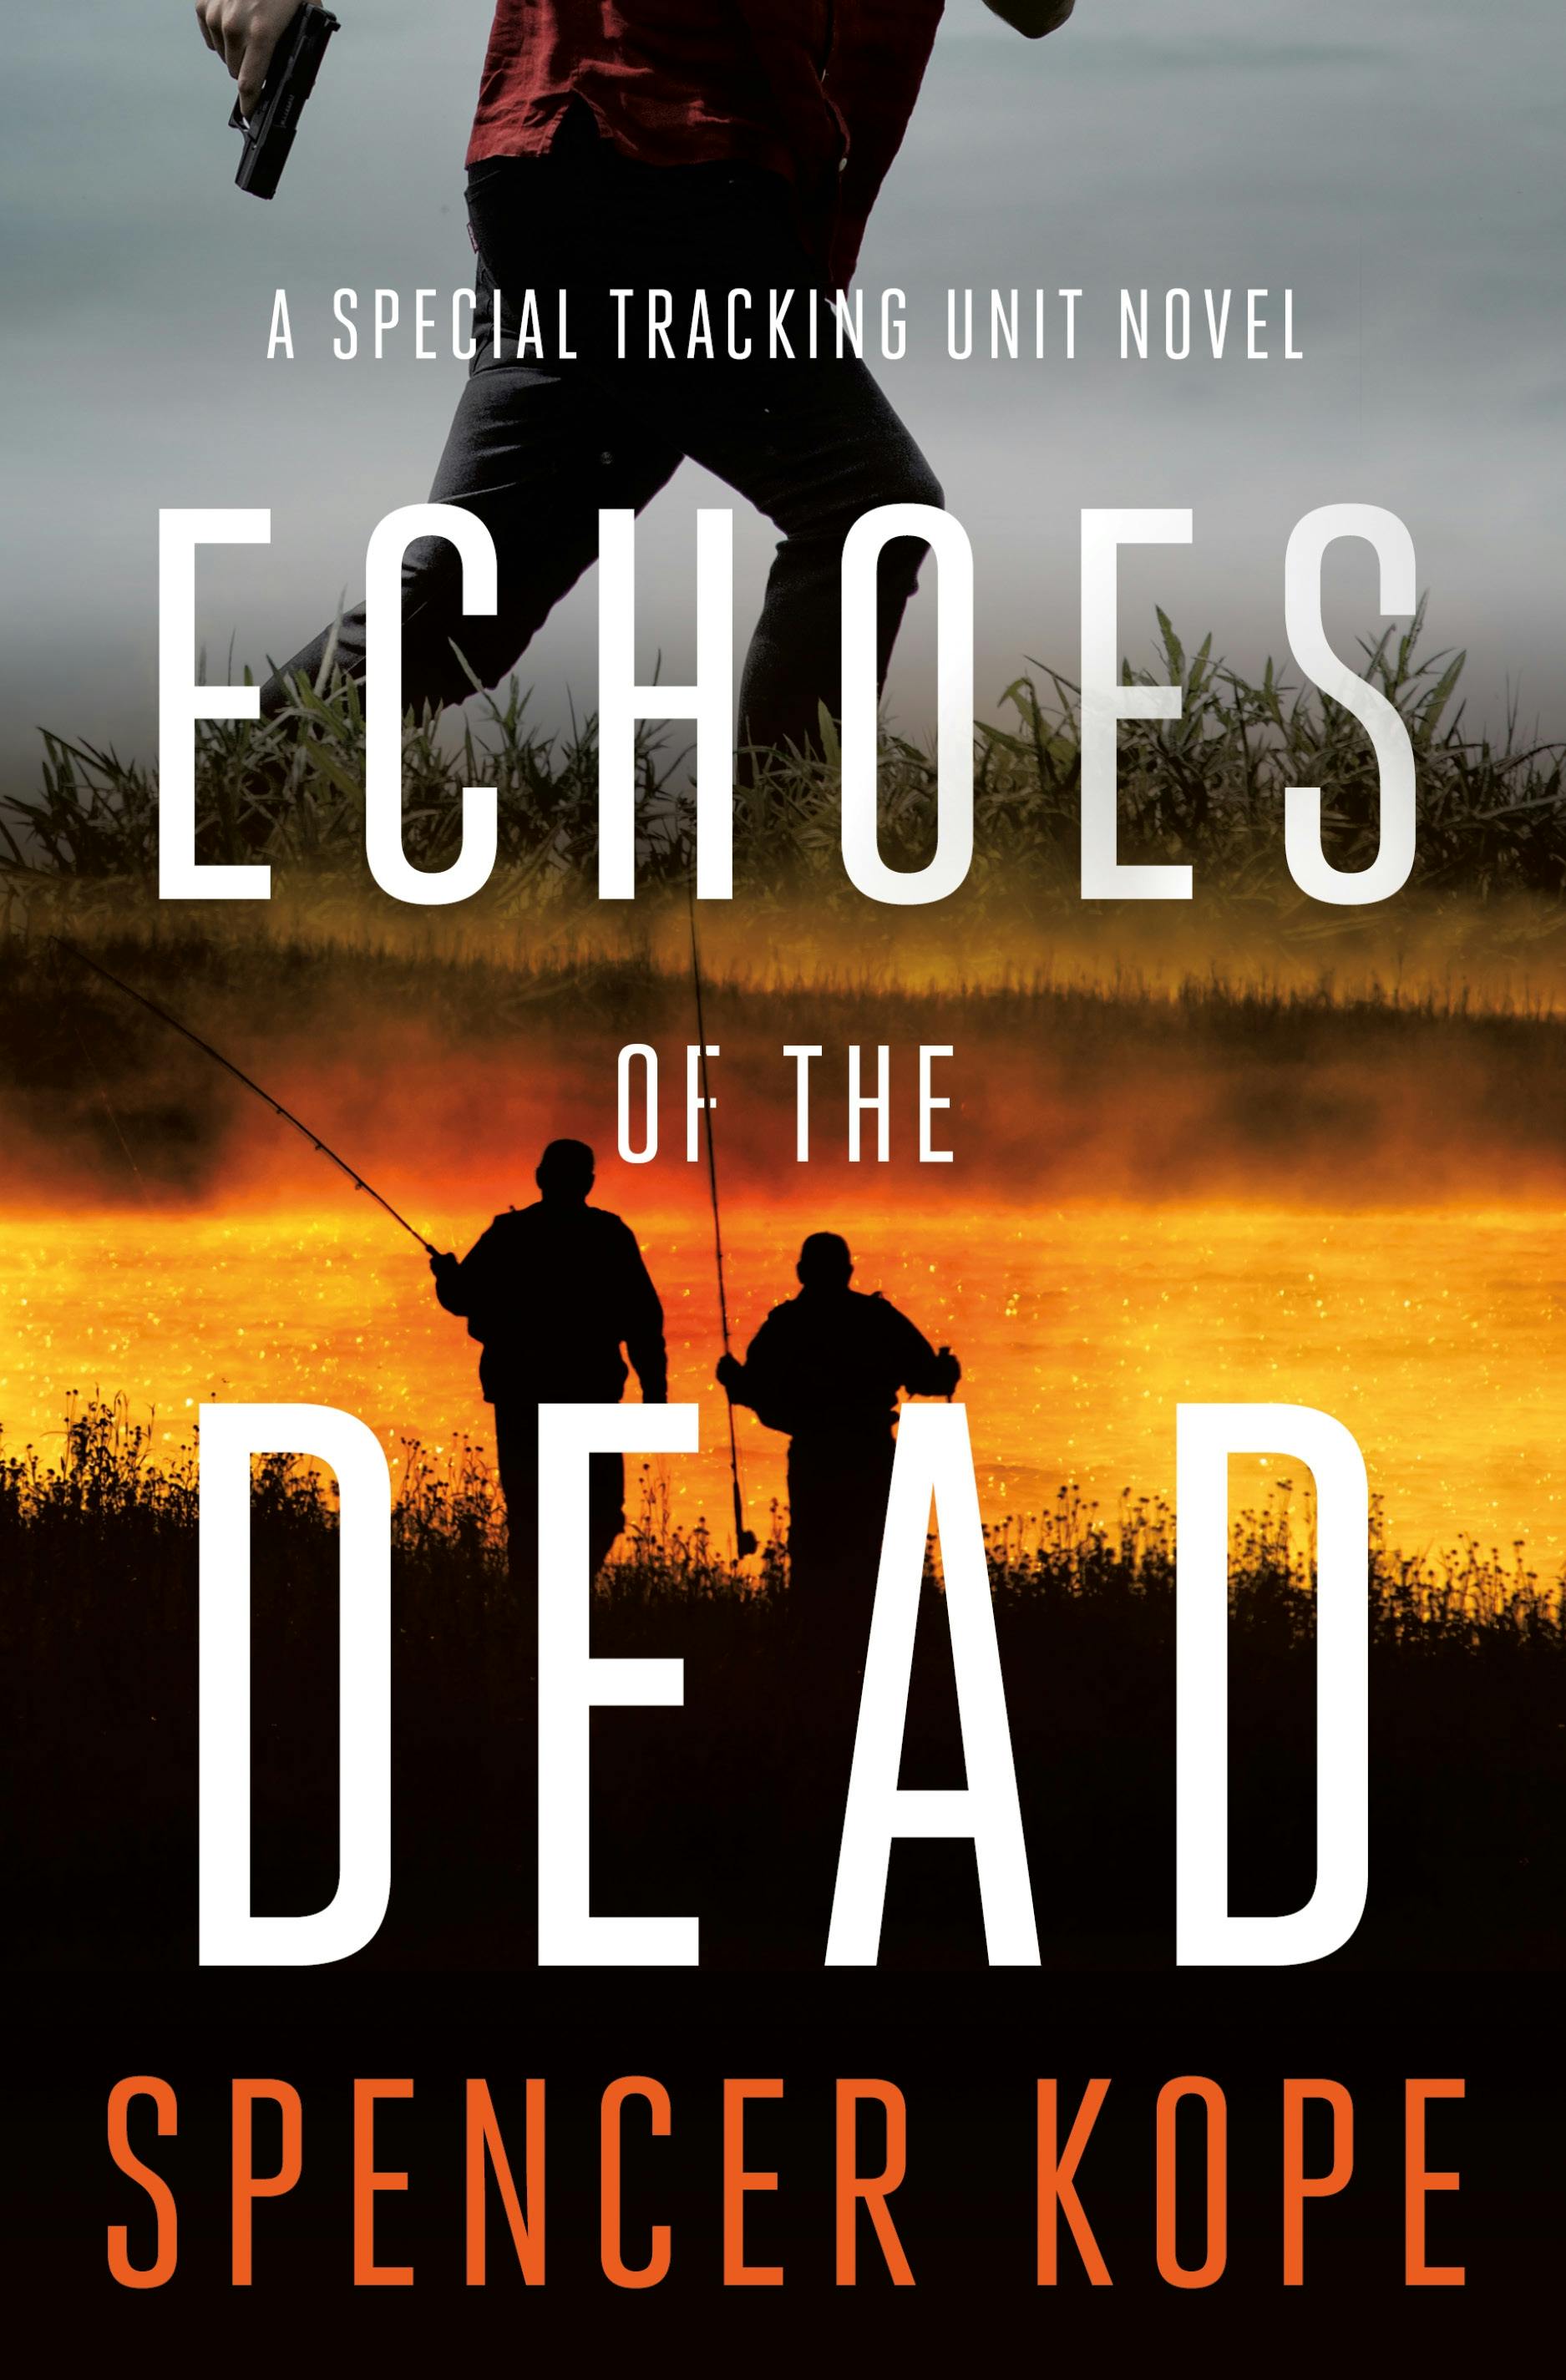 Image of Echoes of the Dead